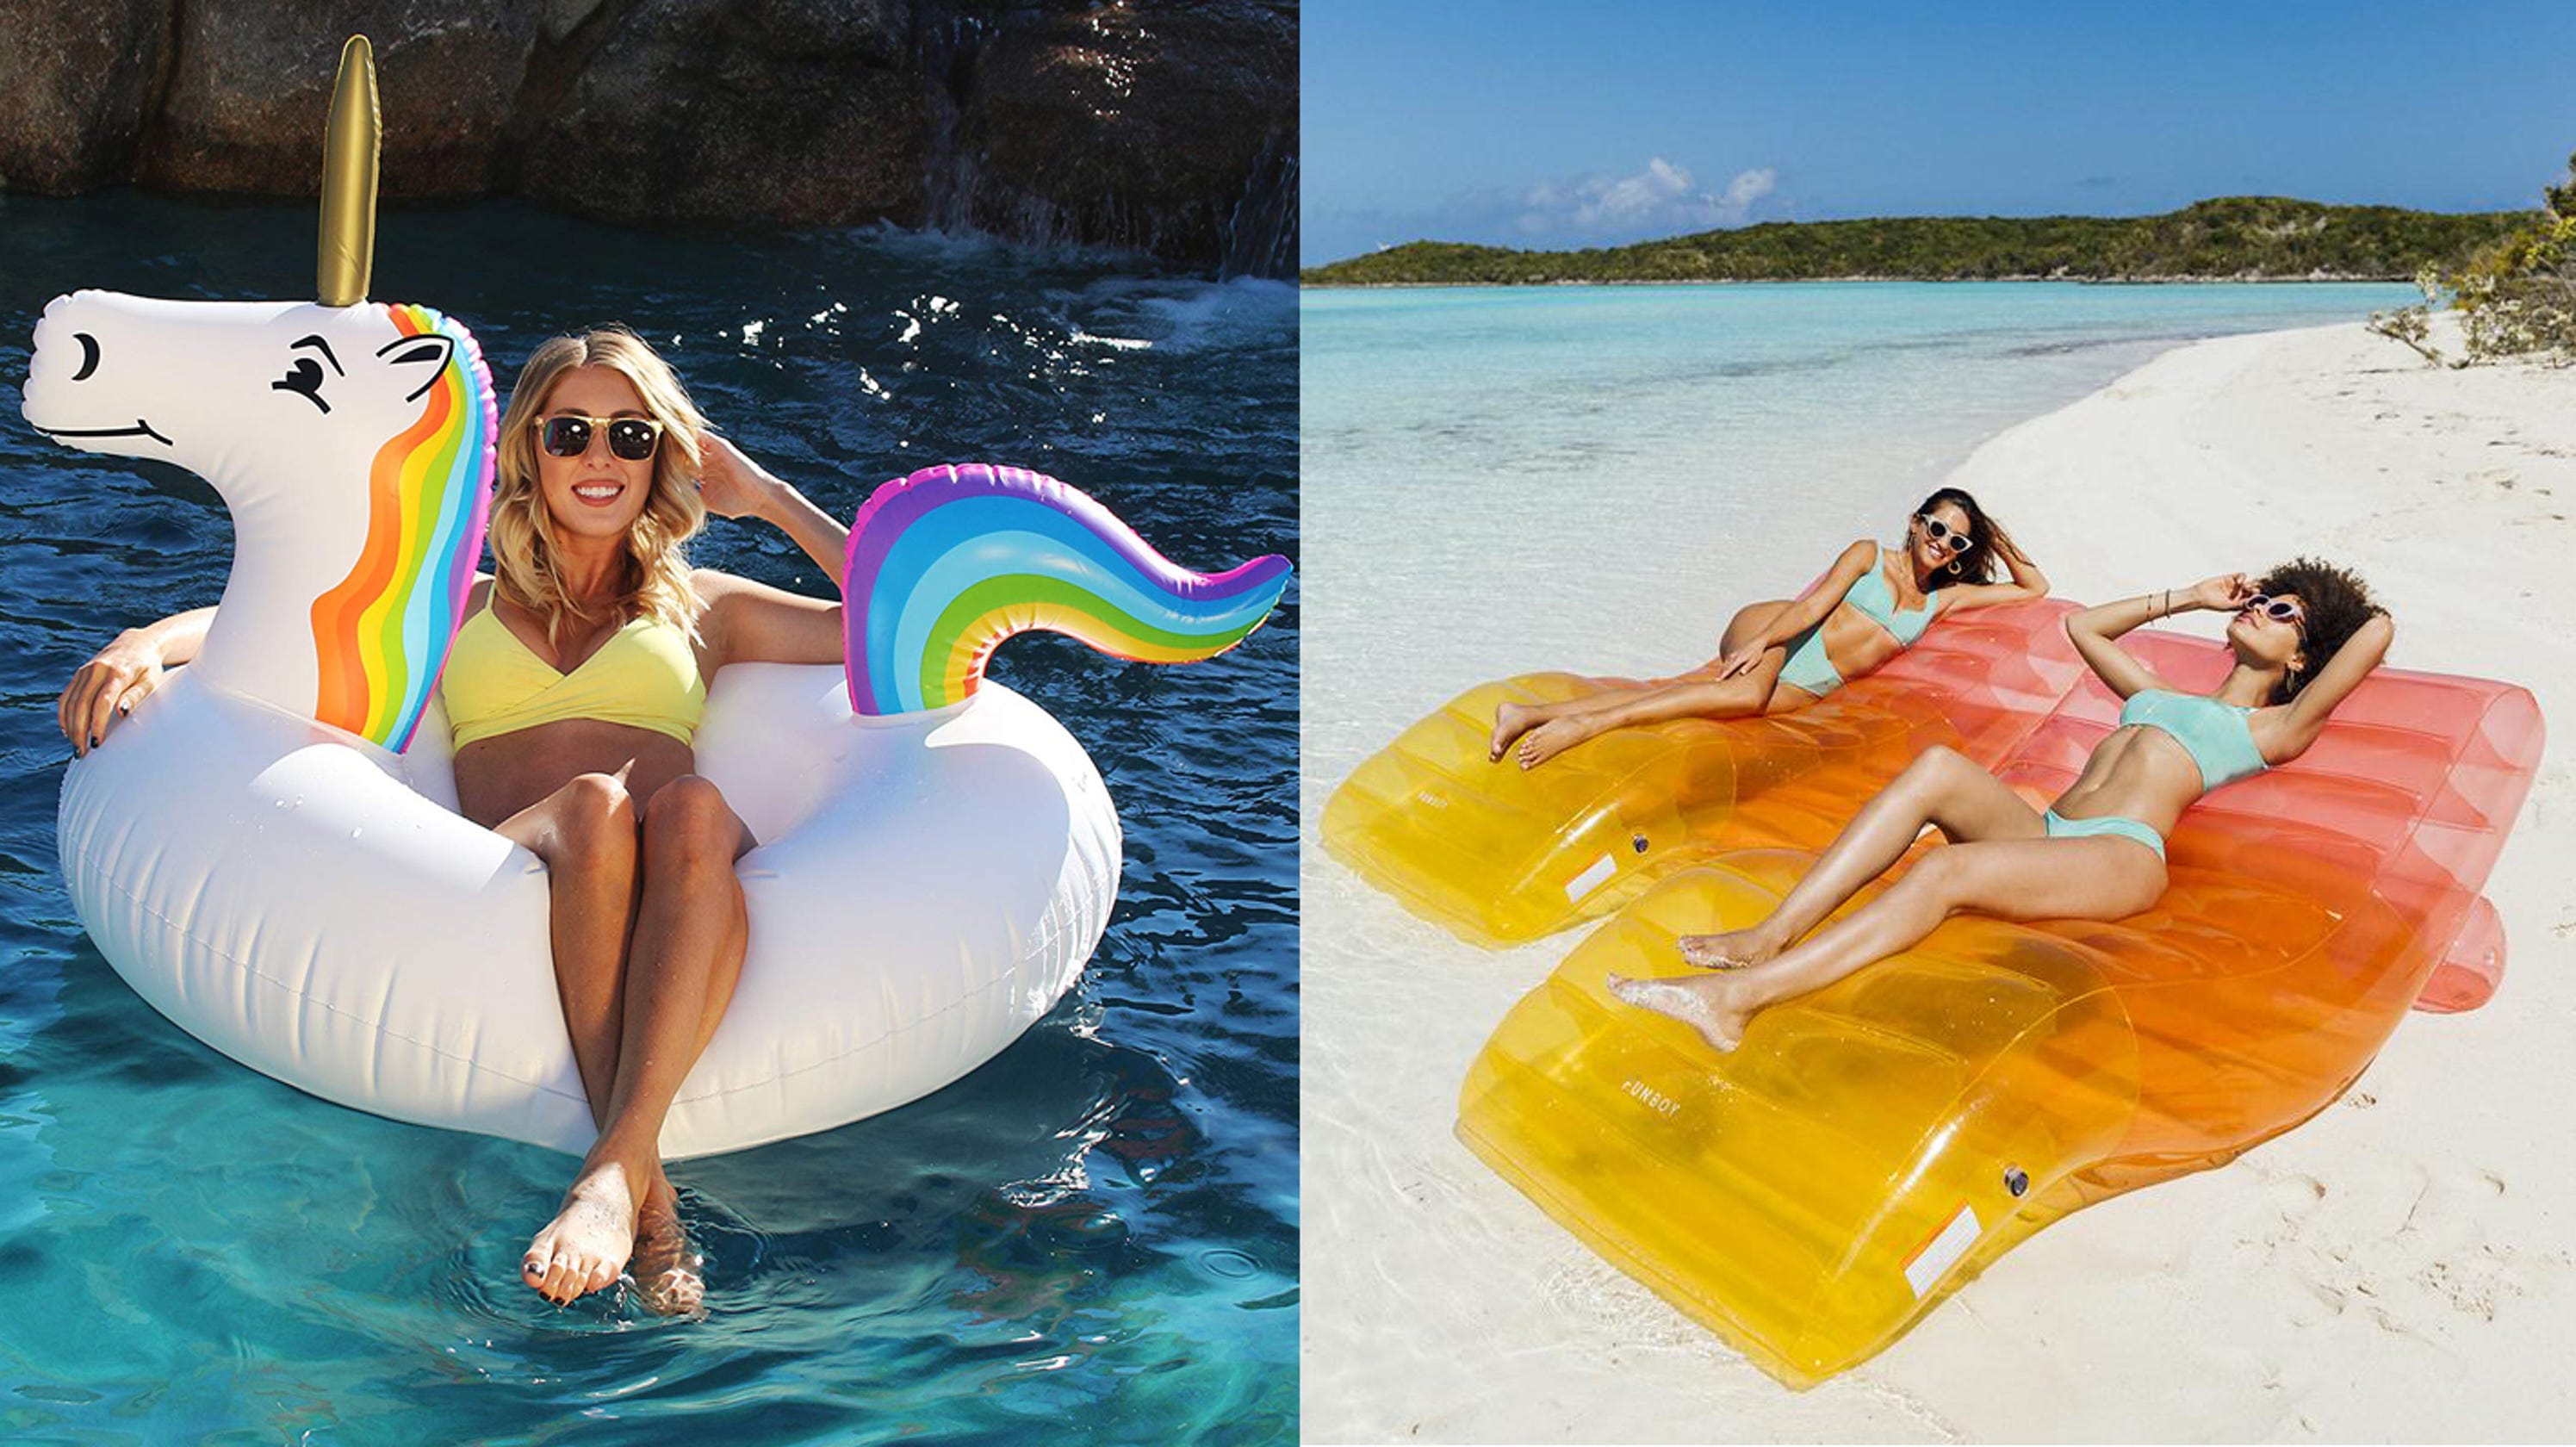 Ba8fc4de 7150 4c04 Bd9e Ad66d49a4436 Pool Floats ?crop=1417,796,x0,y0&width=3200&height=1680&fit=bounds